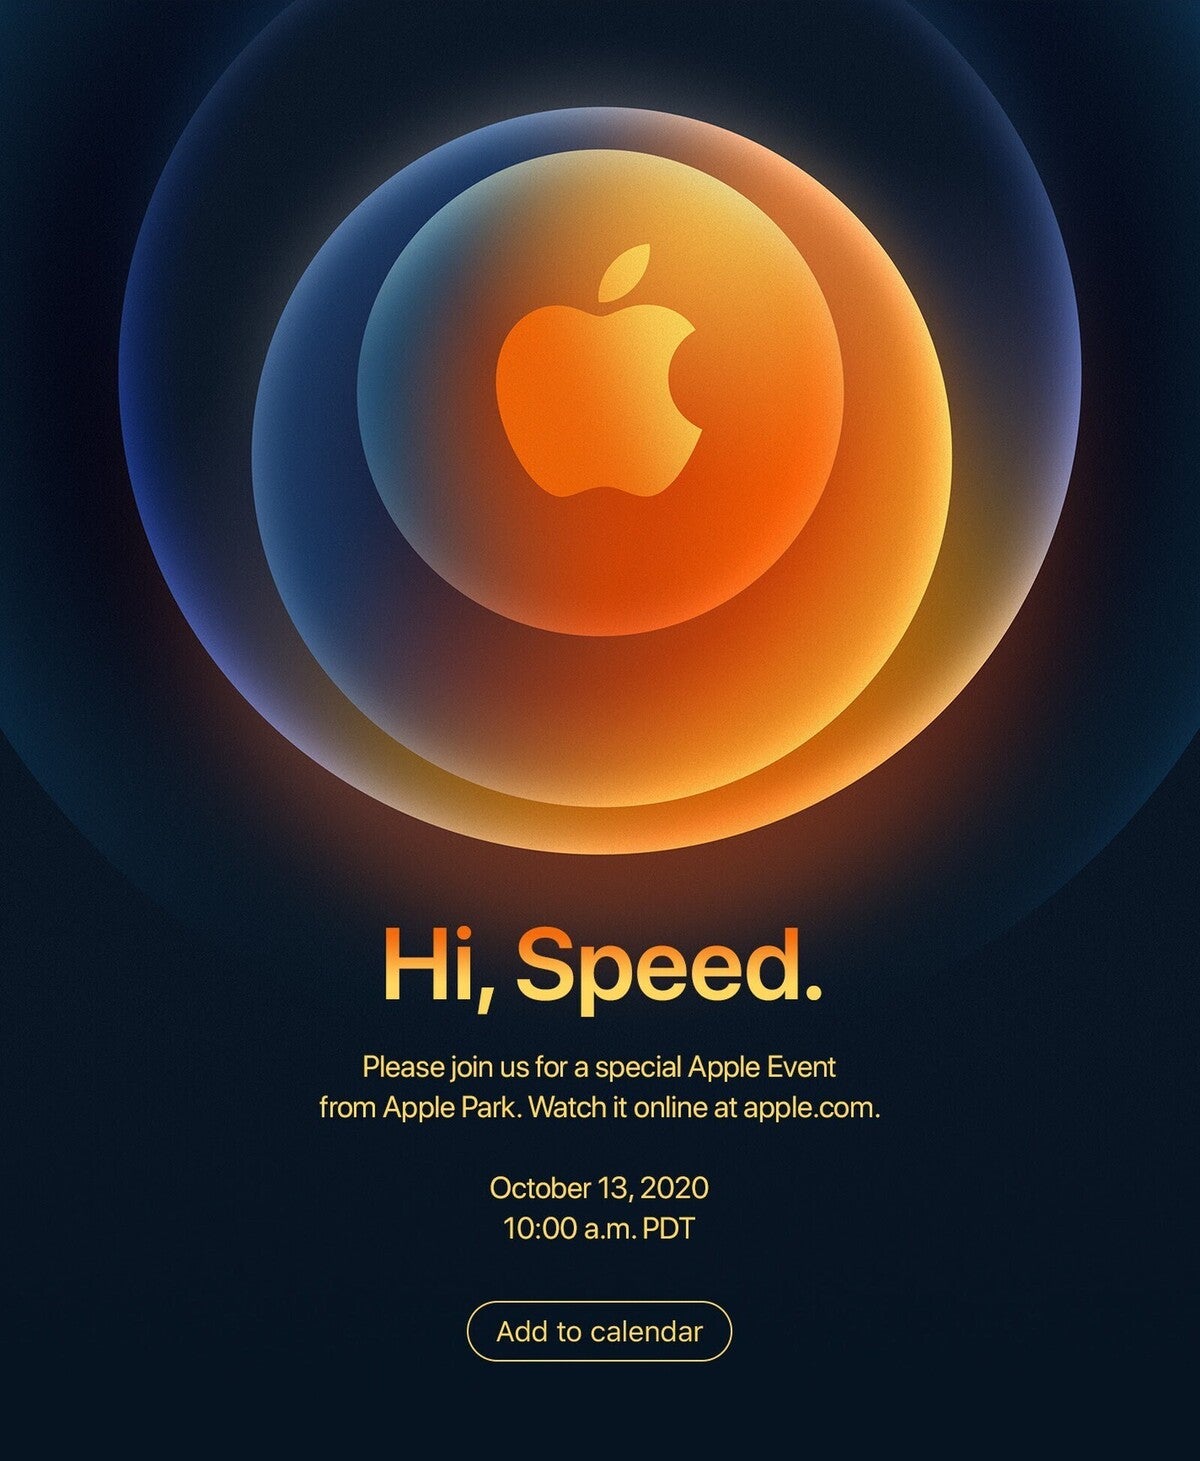 Apple S Event Calendar Hi Speed Event To Take Place On October 13 At 10am Pdt Macworld